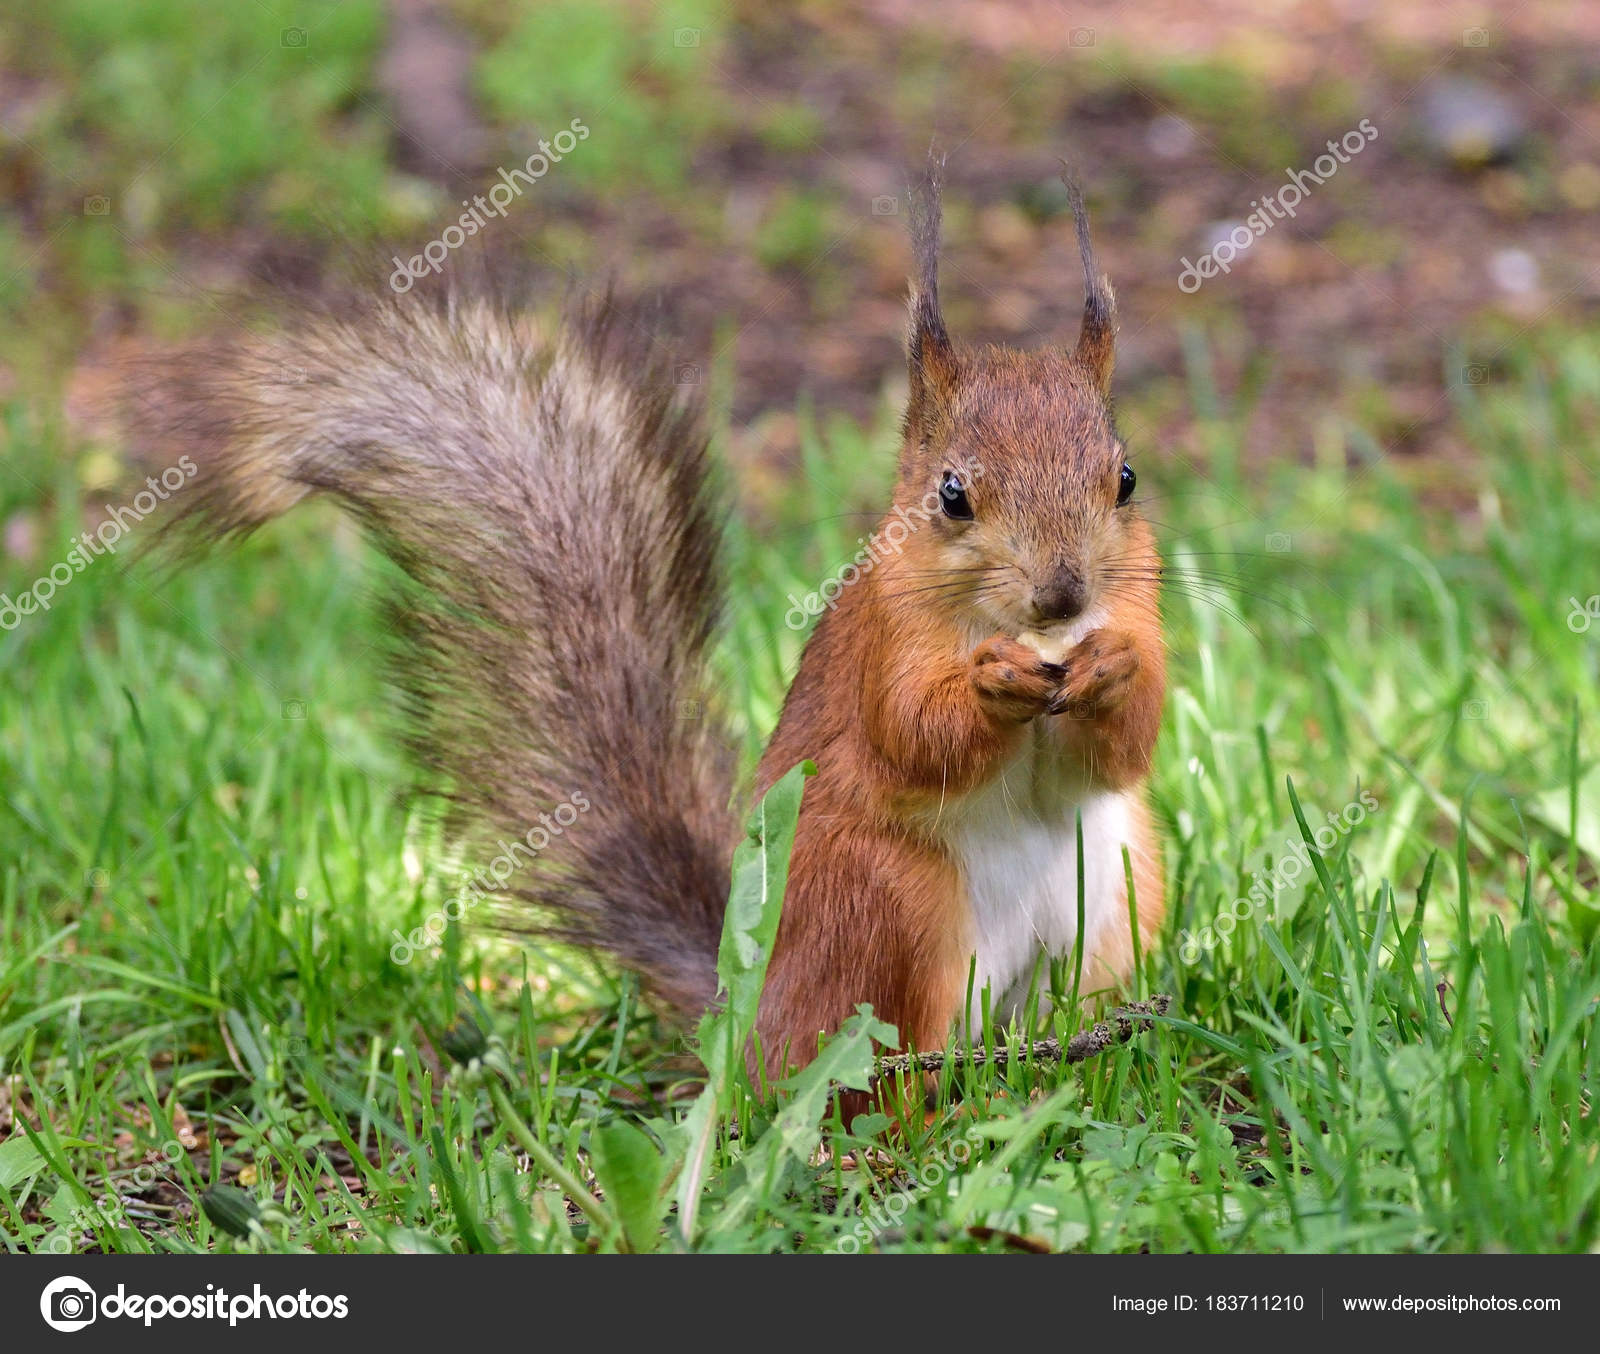 Cute Red Squirrel Eating Nut Grass — Stock Photo © Astellas #183711210